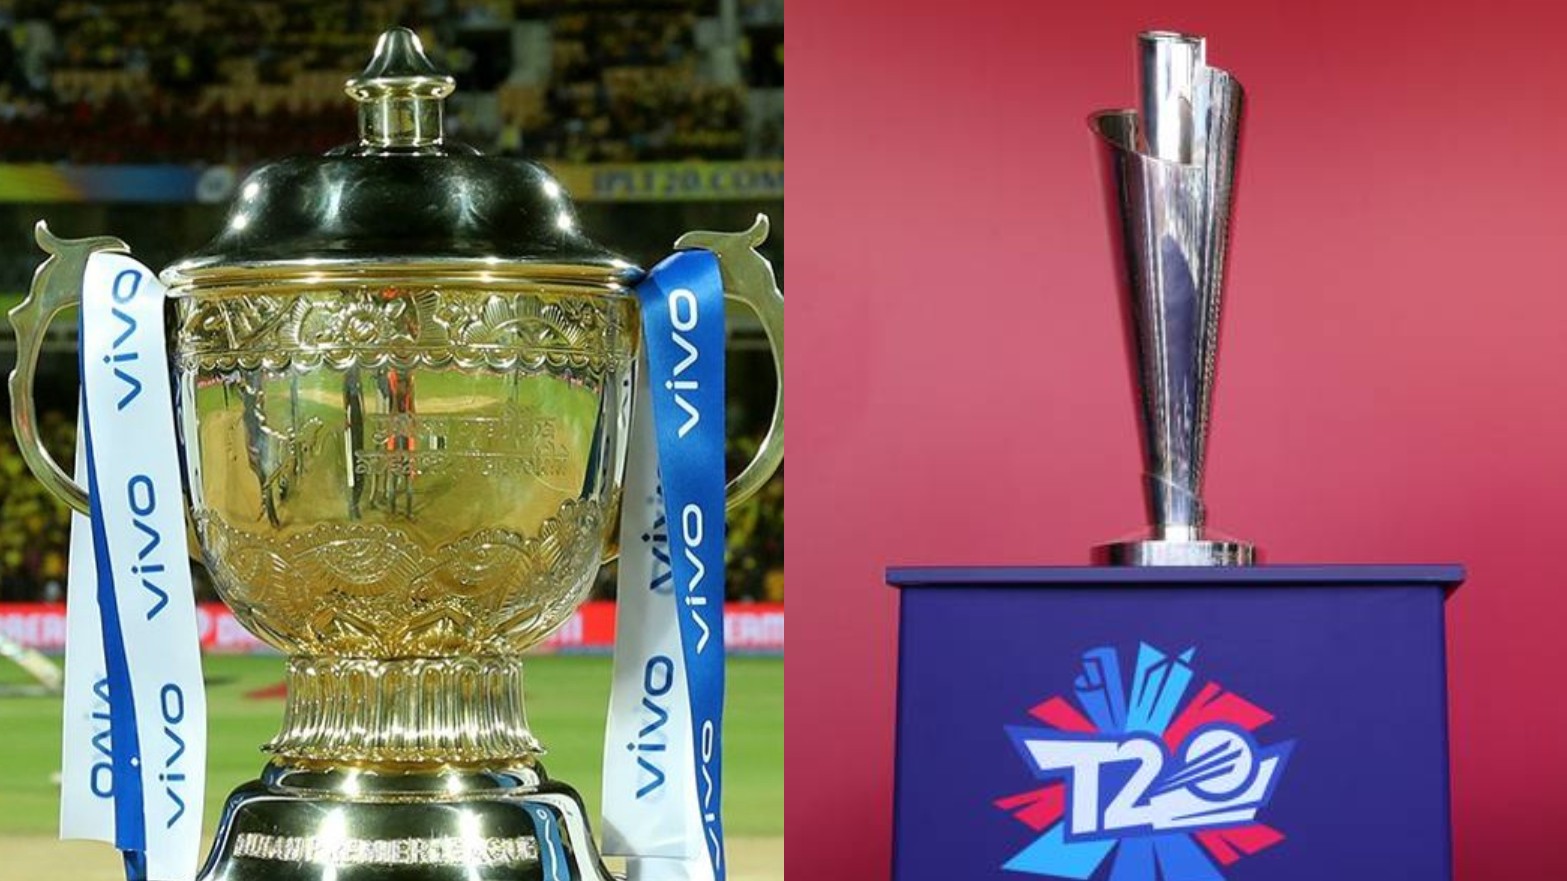 IPL 2020 may happen if the T20 World Cup is postponed to next year